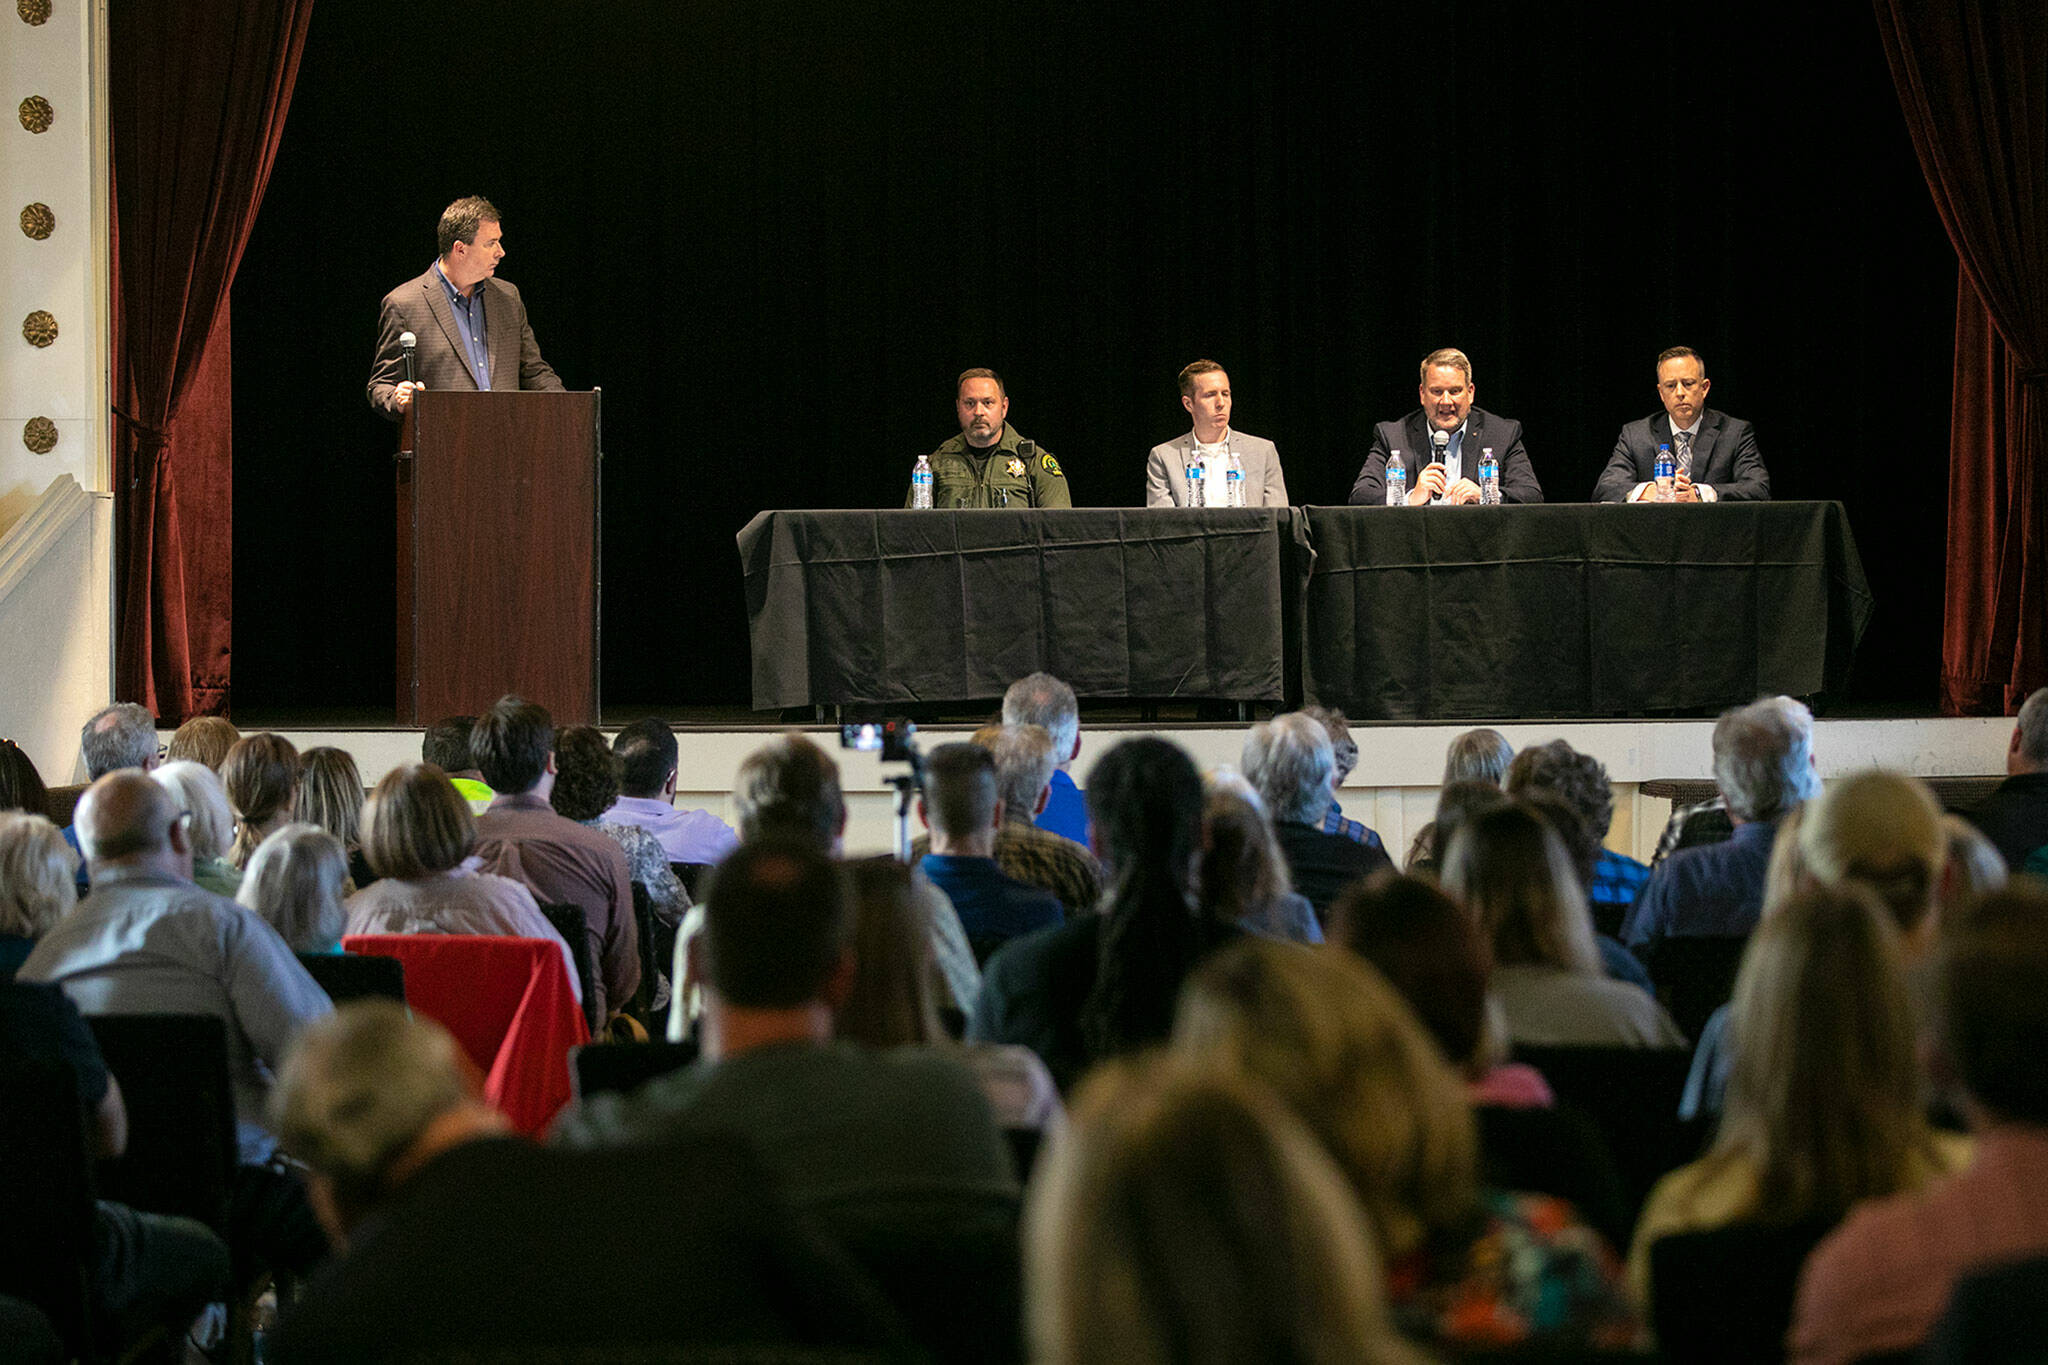 A packed house watches a panel consisting of (seated, from left) Sheriff Adam Fortney, County Council members Nate Nehring and Sam Low, and Matt Baldock, chief criminal deputy prosecutor, during a public safety town hall meeting Wednesday at the Marysville Opera House in Marysville. (Ryan Berry / The Herald)